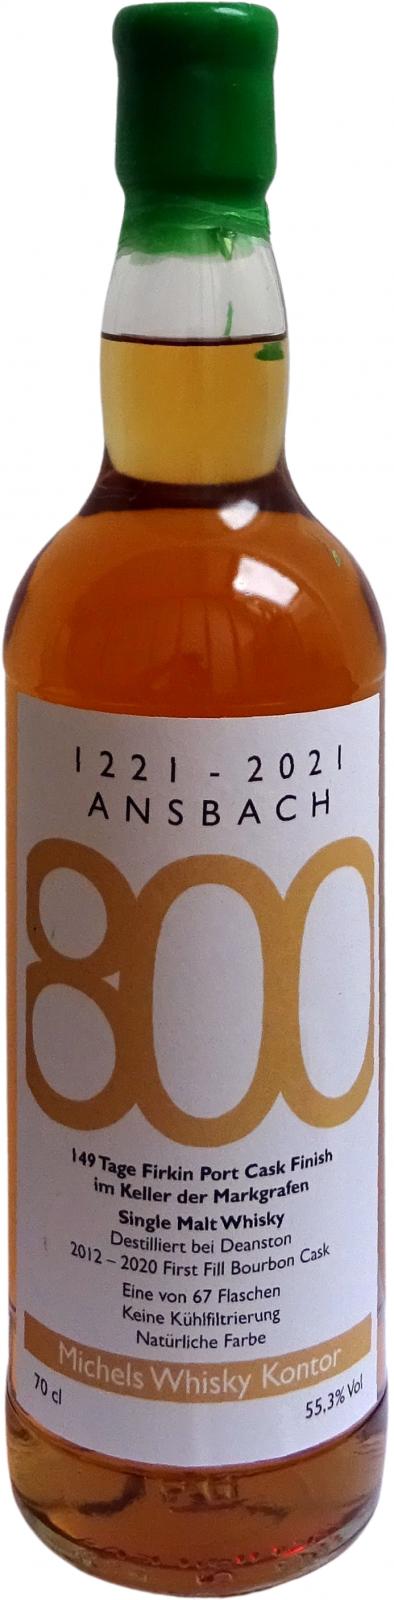 Deanston 2012 MWK 800 years Stadt Ansbach 55.3% 700ml